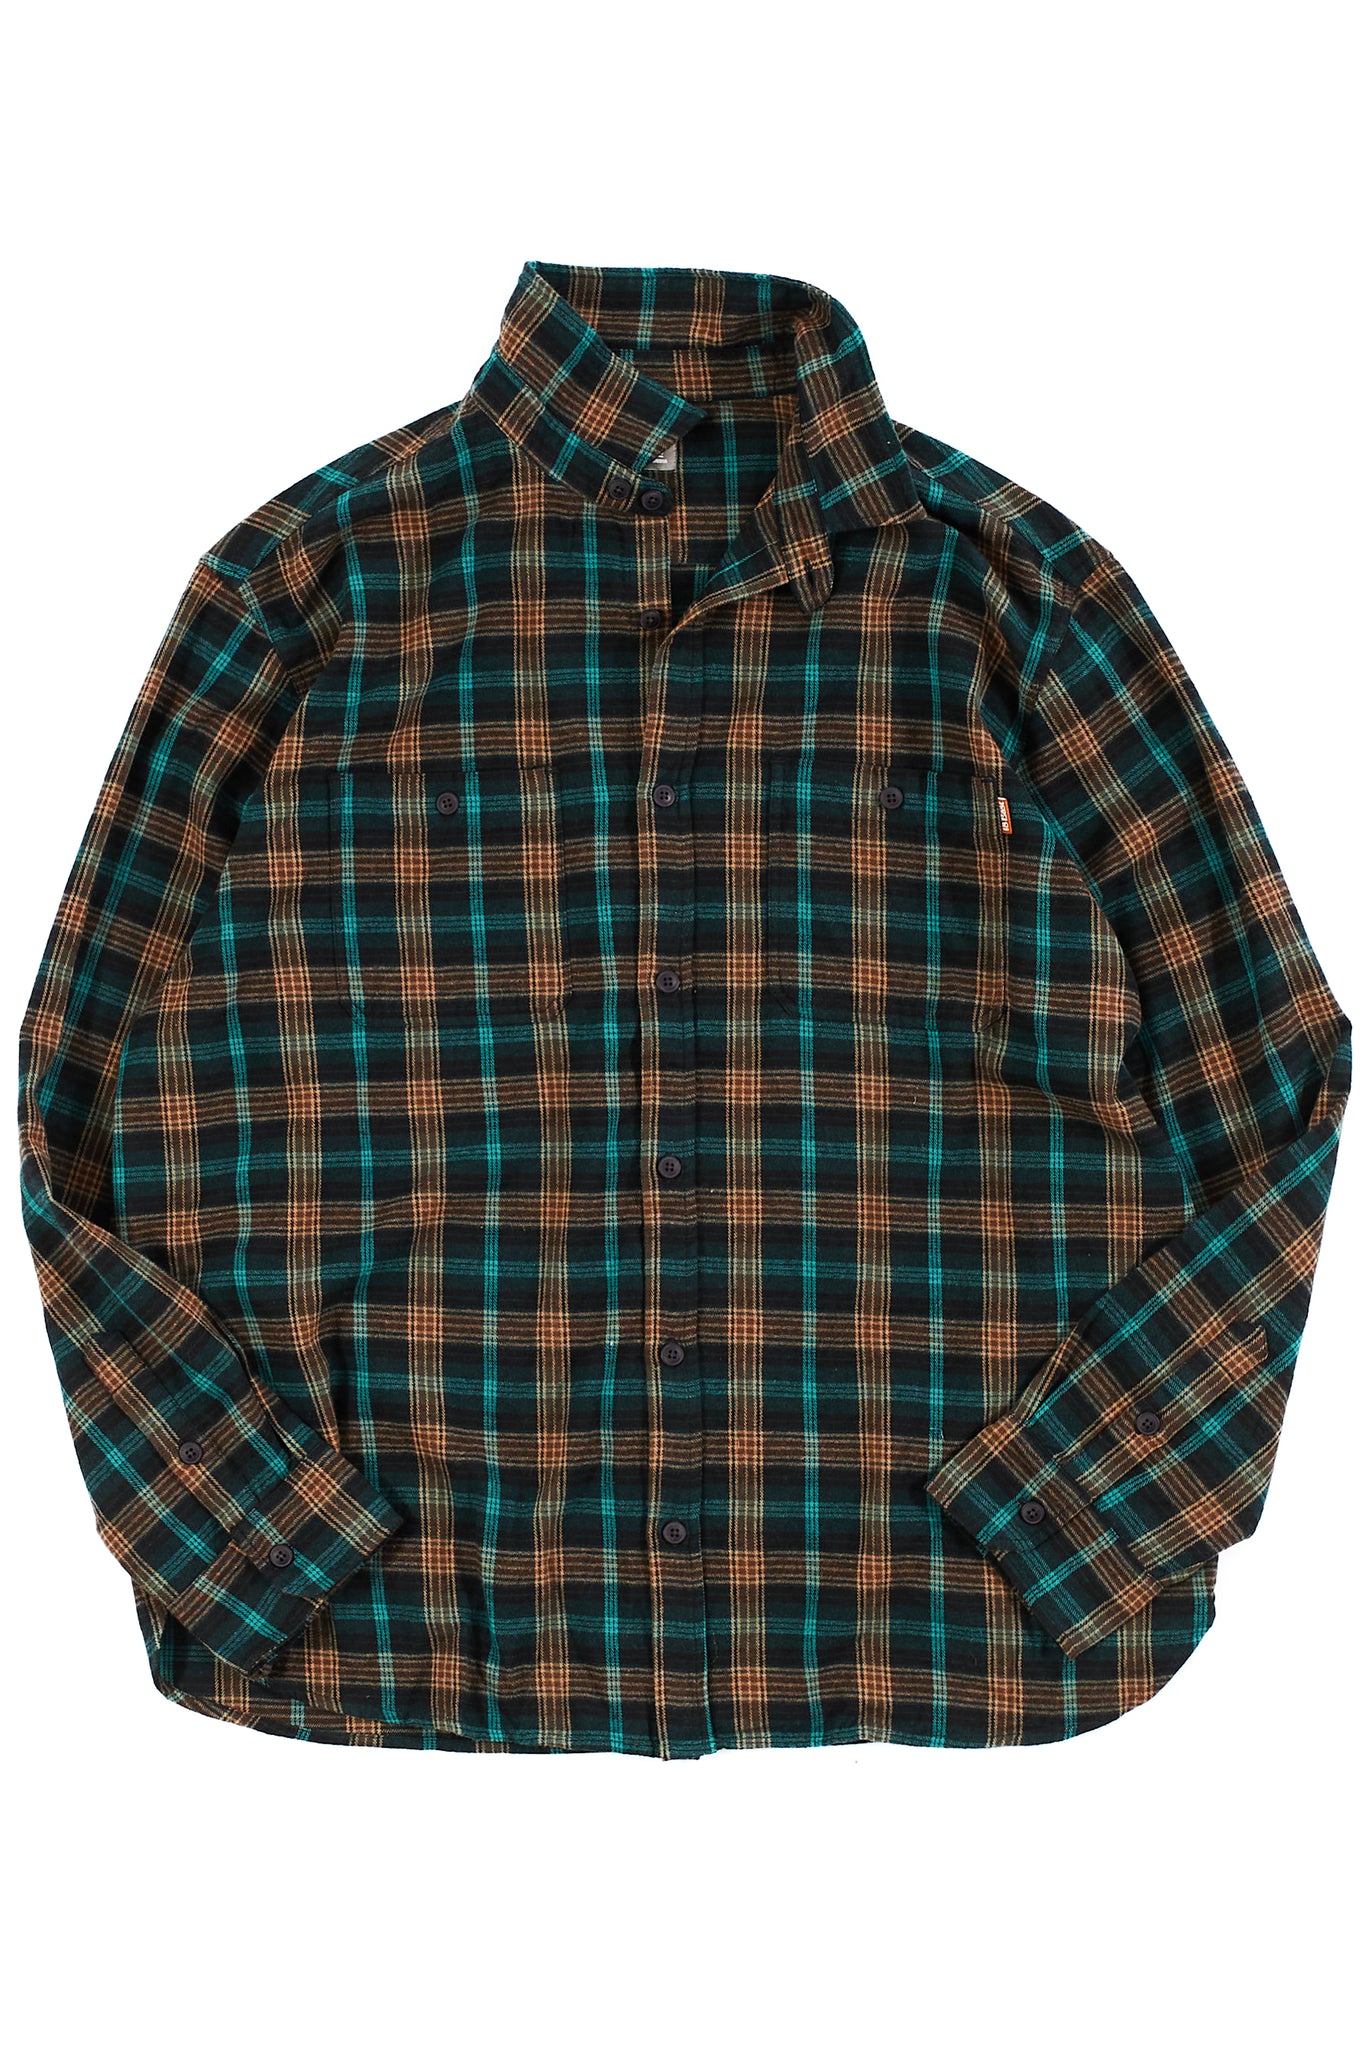 CLAREDITCH WORK SHIRT - FOREST BRUSHED COTTON PLAID